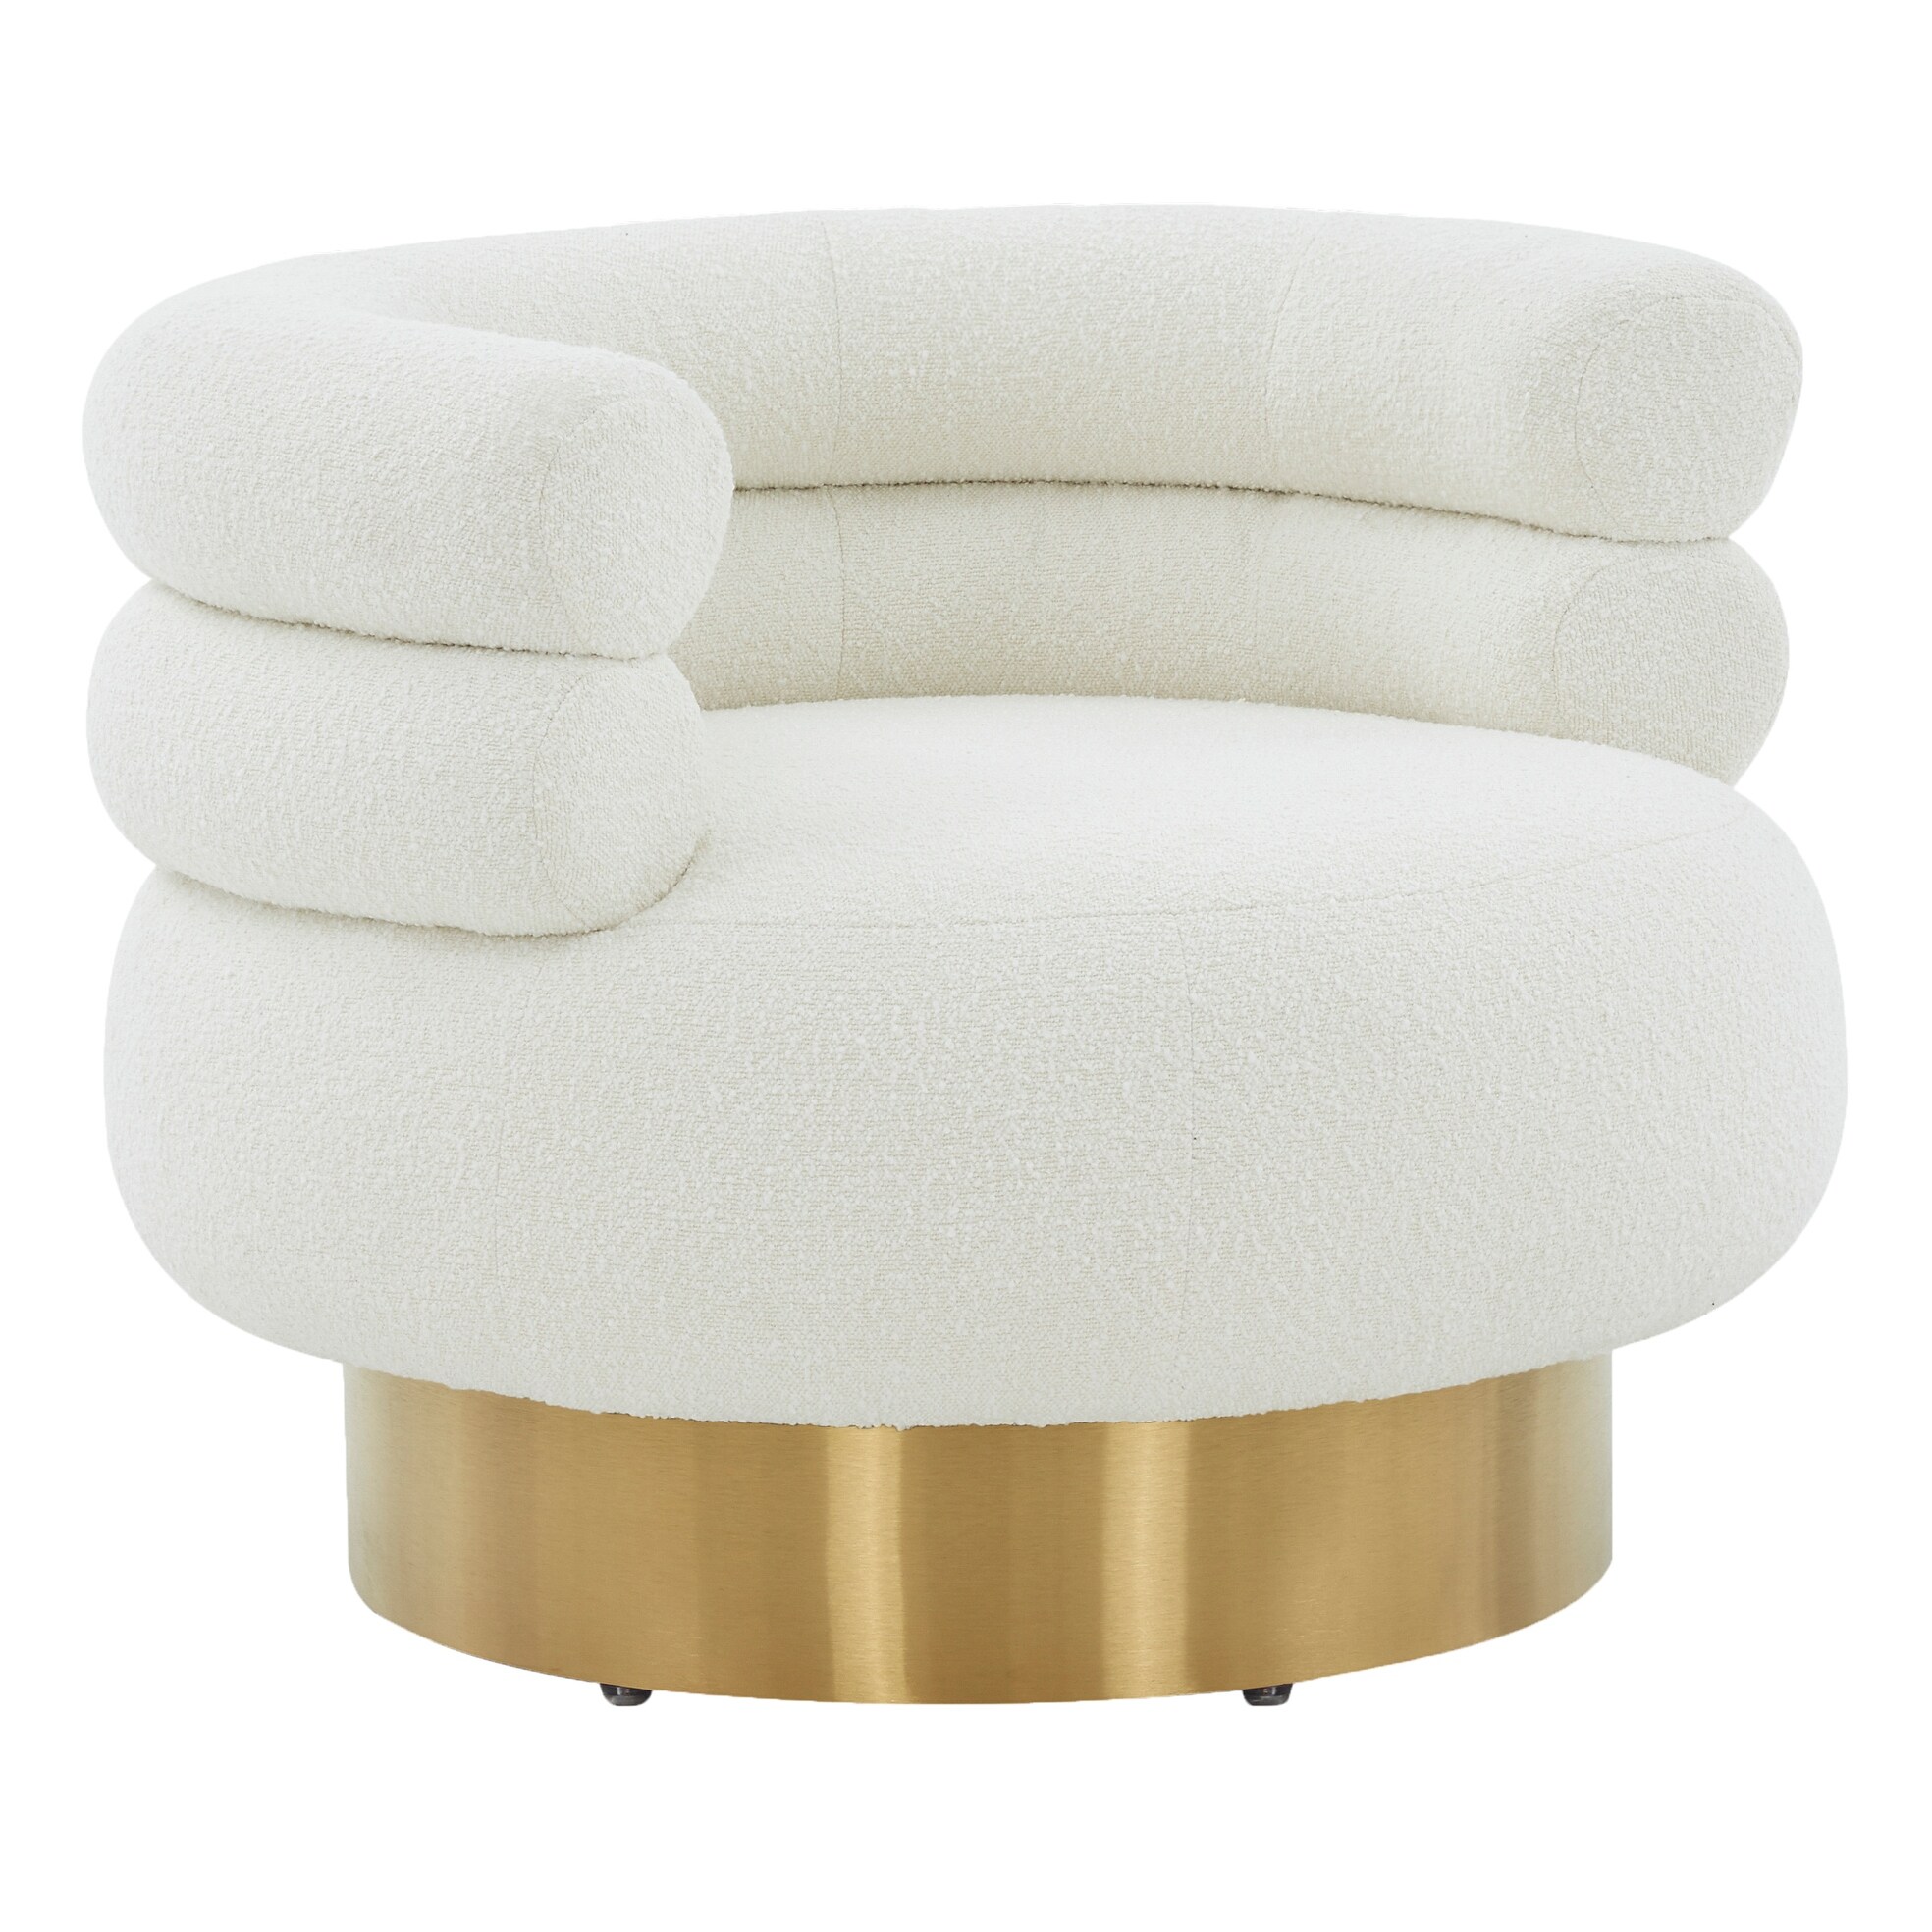 SAFAVIEH Couture Wendell Boucle Swivel Chair - 33 IN W x 33 IN D x 26 IN H